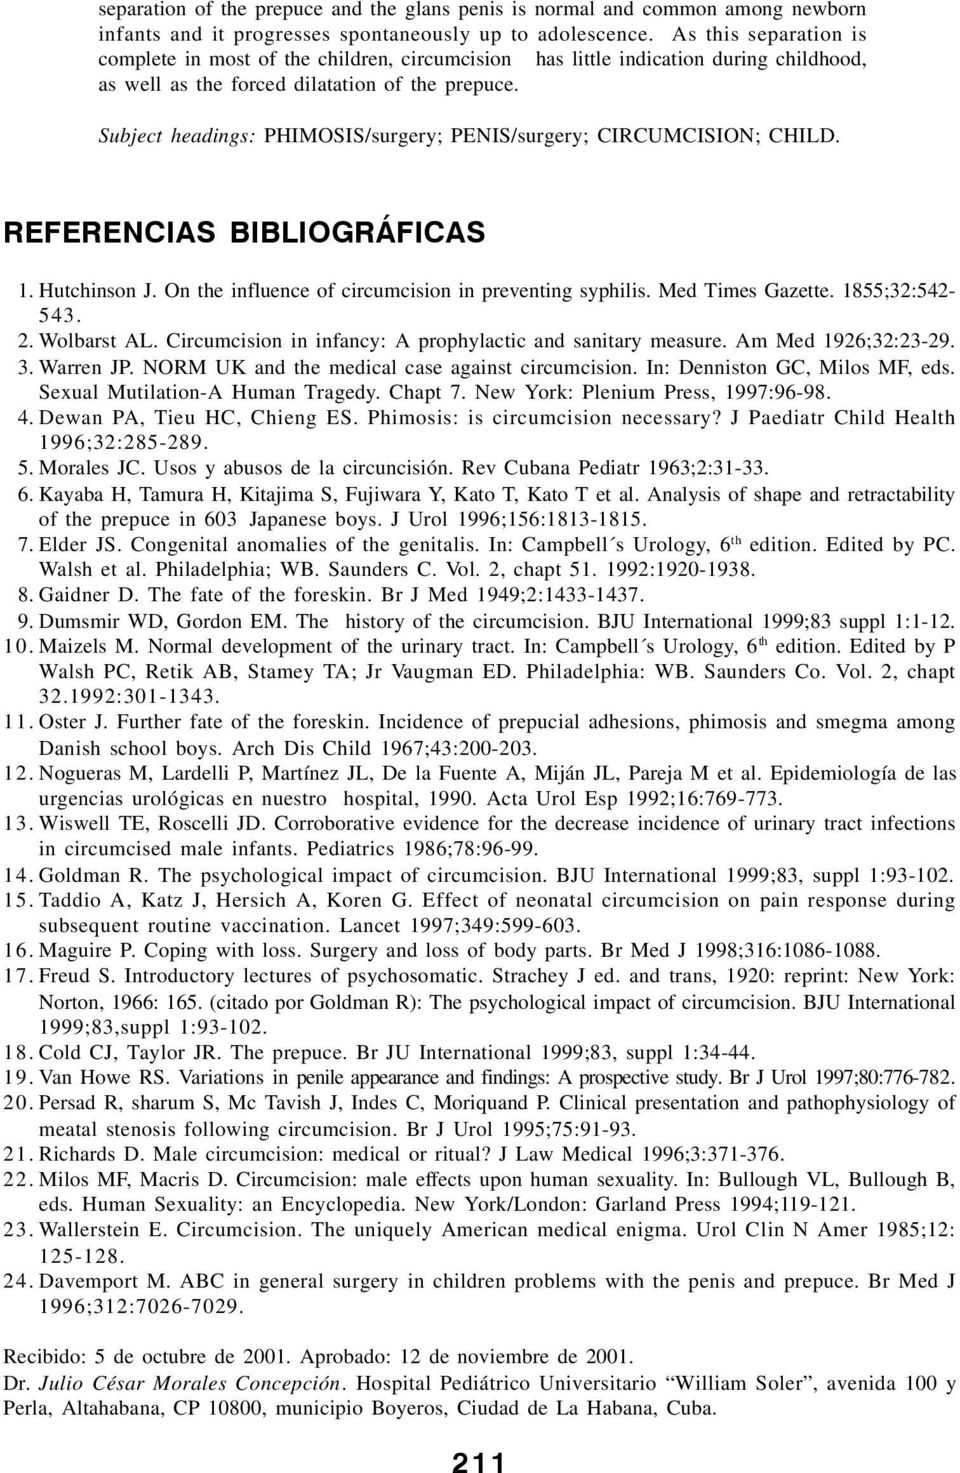 Subject headings: PHIMOSIS/surgery; PENIS/surgery; CIRCUMCISION; CHILD. REFERENCIAS BIBLIOGRÁFICAS 1. Hutchinson J. On the influence of circumcision in preventing syphilis. Med Times Gazette.